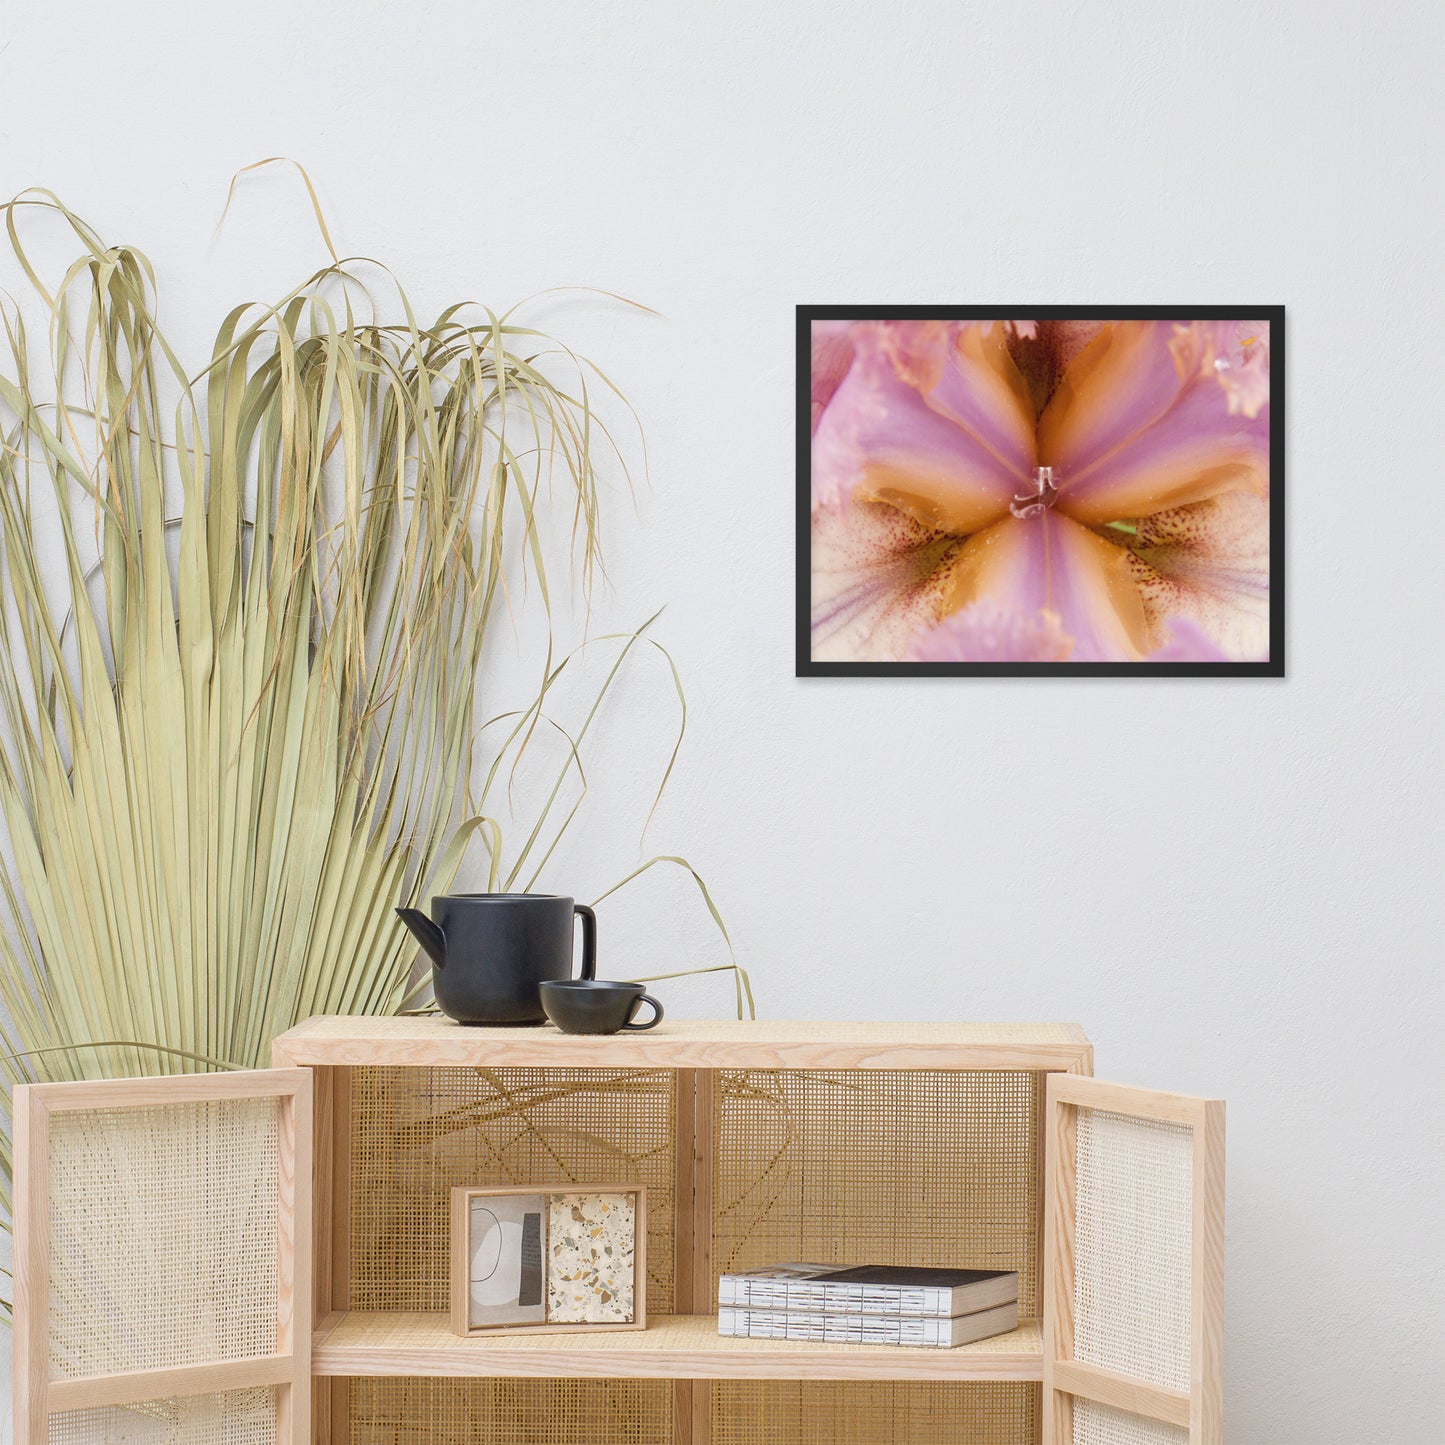 Symmetry of Nature Floral Nature Photo Framed Wall Art Print